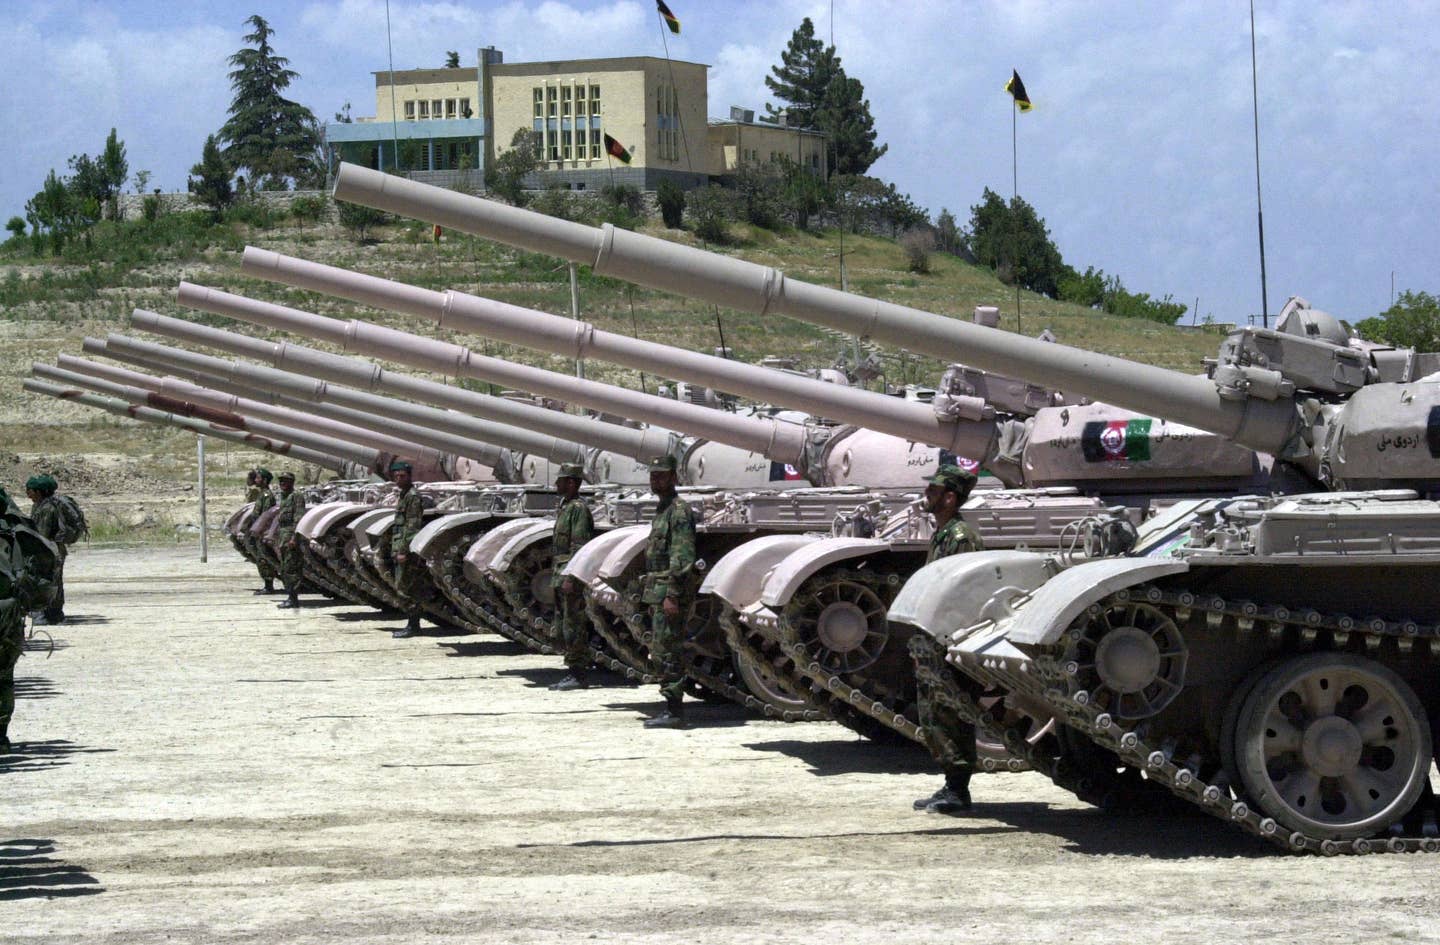 T-62 Main Battle Tanks (MBT) during a graduation ceremony held at Polycharky, Afghanistan. <em>Wikimedia Commons</em>